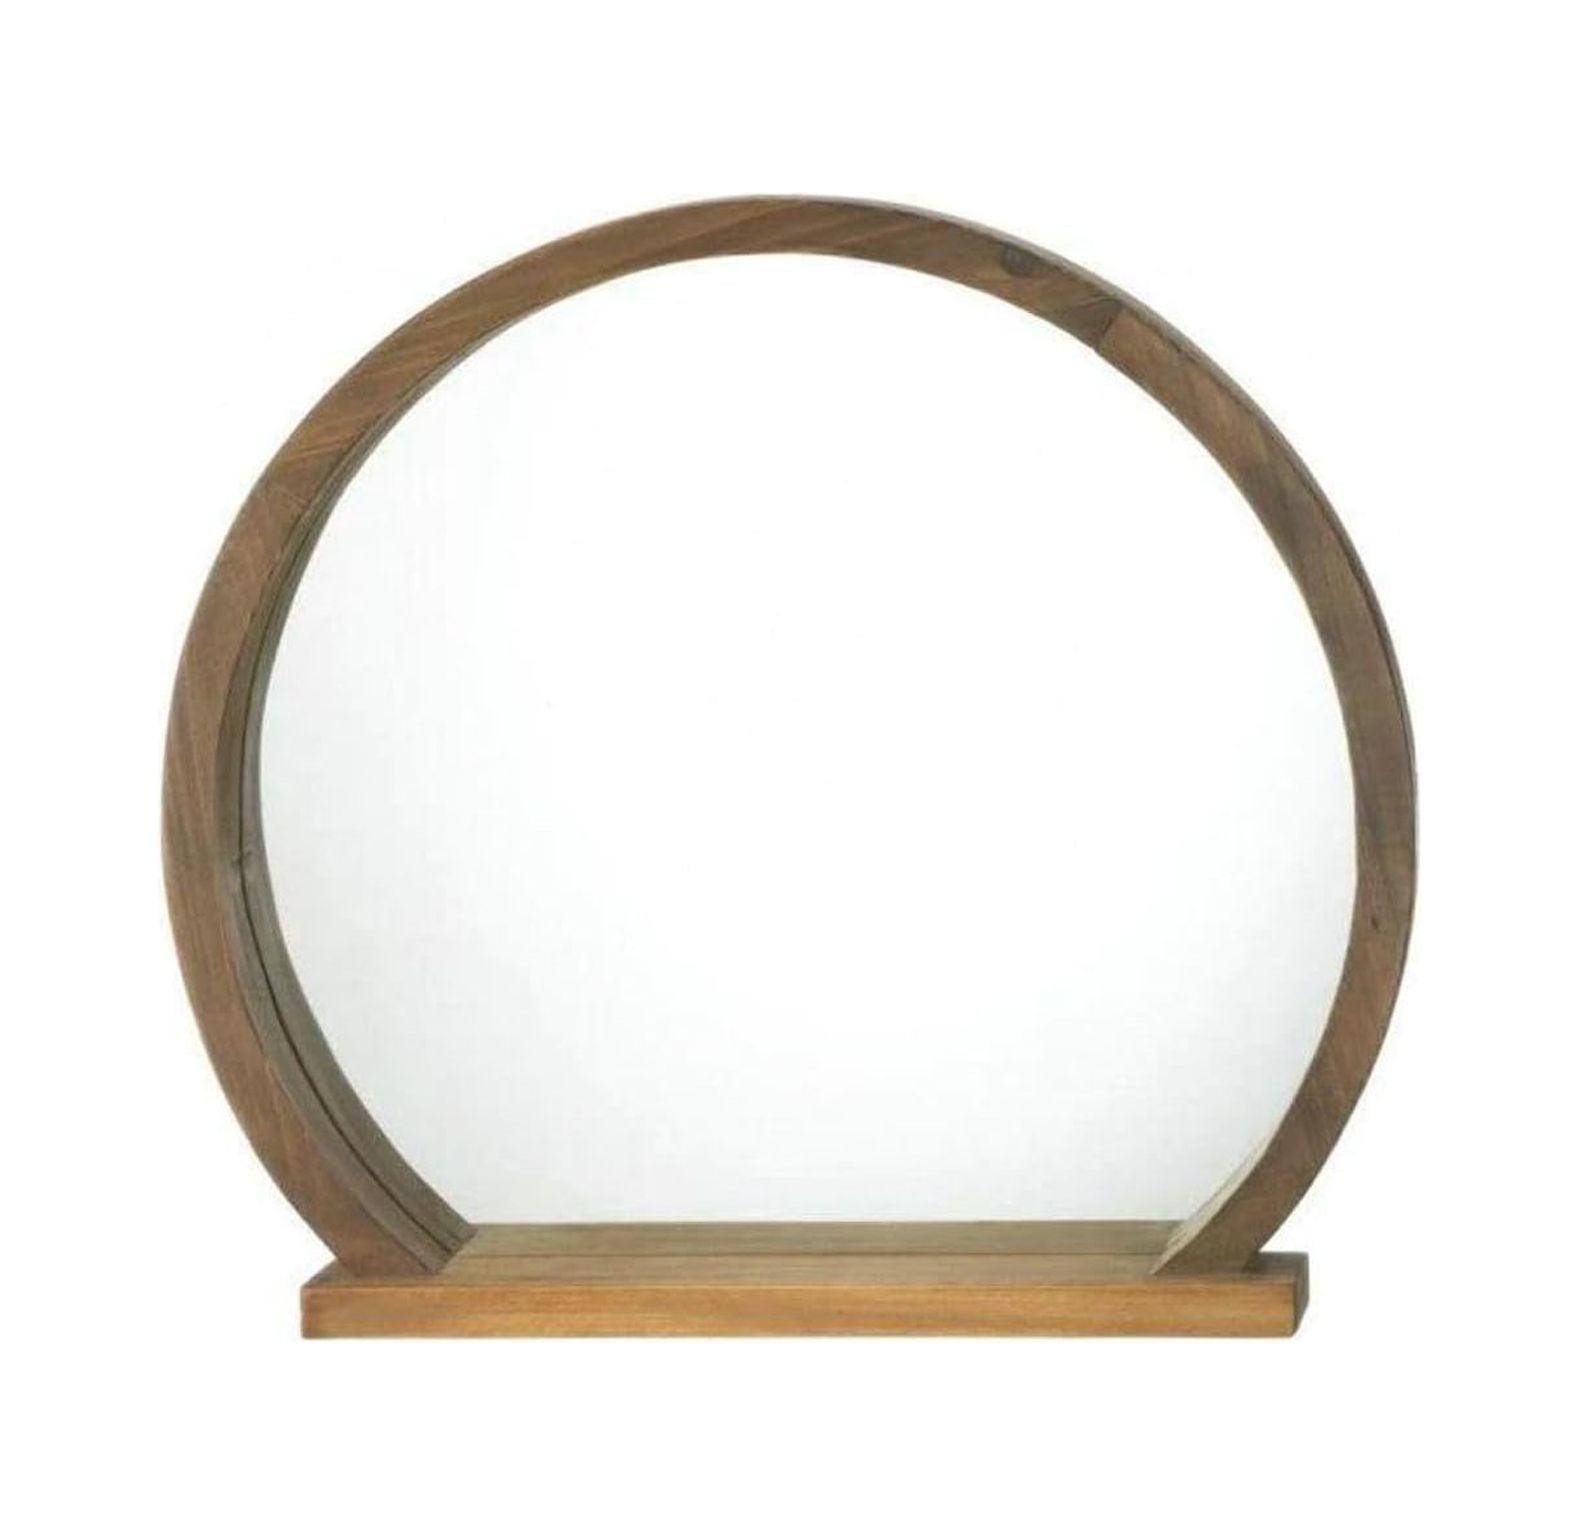 Rustic Round Wooden Mirror with Functional Shelf 17.75x2.75x16"